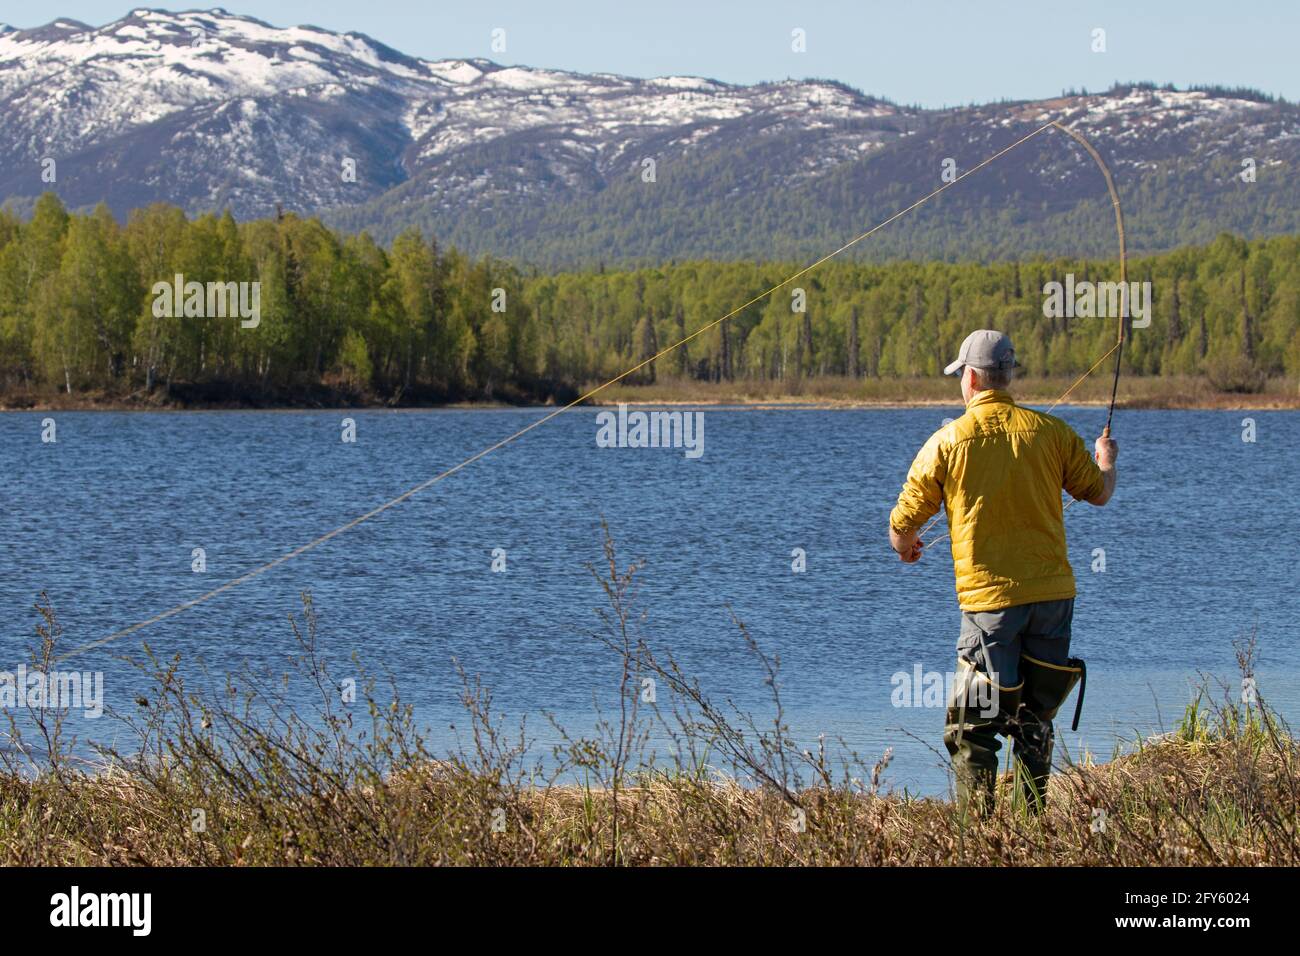 An angler casts for northern pike and rainbow trout on a remote lake in Southcentral Alaska's Susitna Valley. Stock Photo